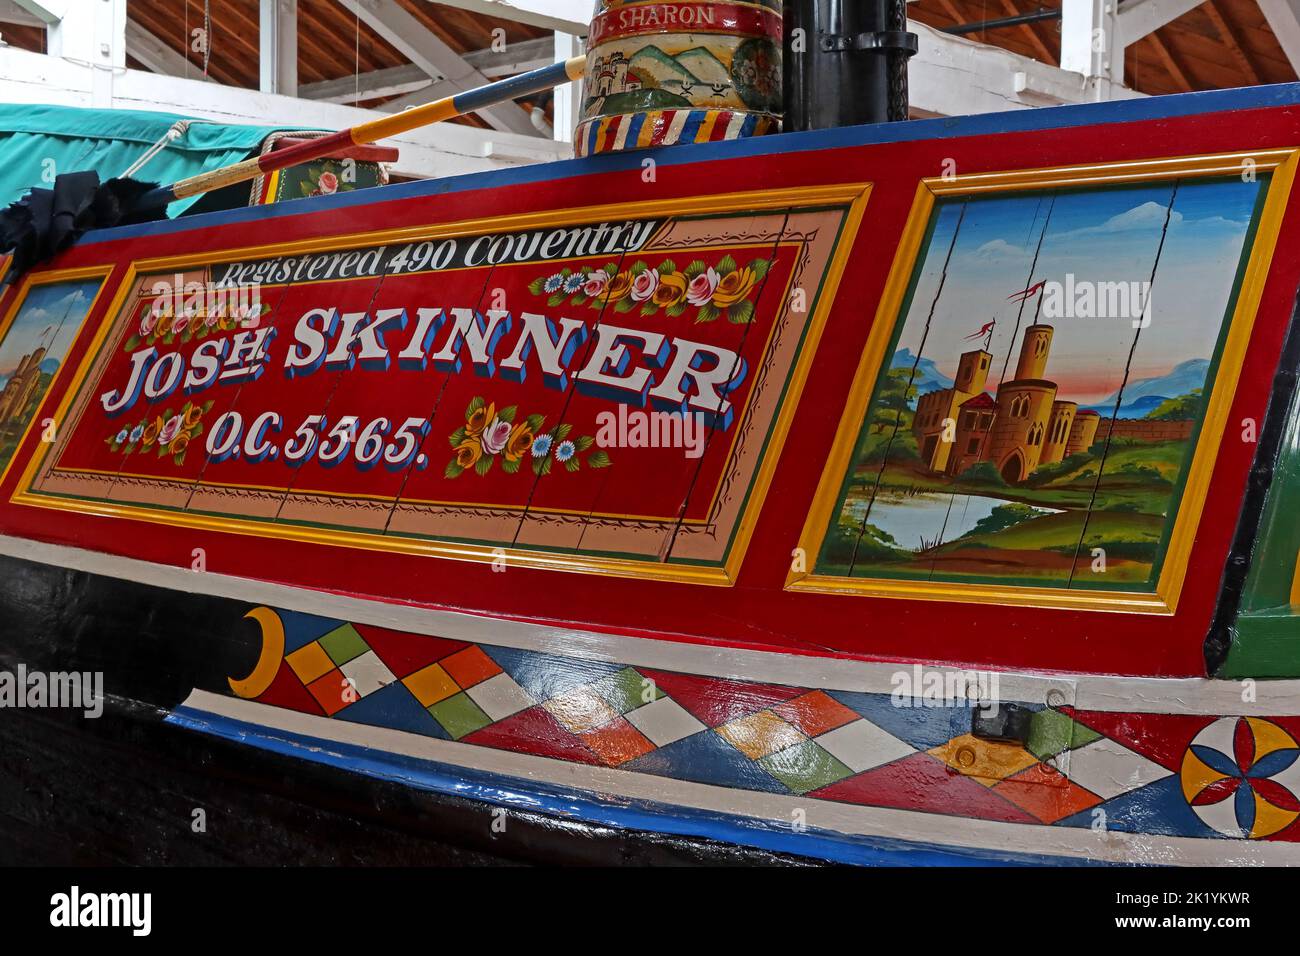 Barge decoration, Josh Skinner, OC 5565, Registered 490 Coventry, traditionally decorated barge, castle image Stock Photo